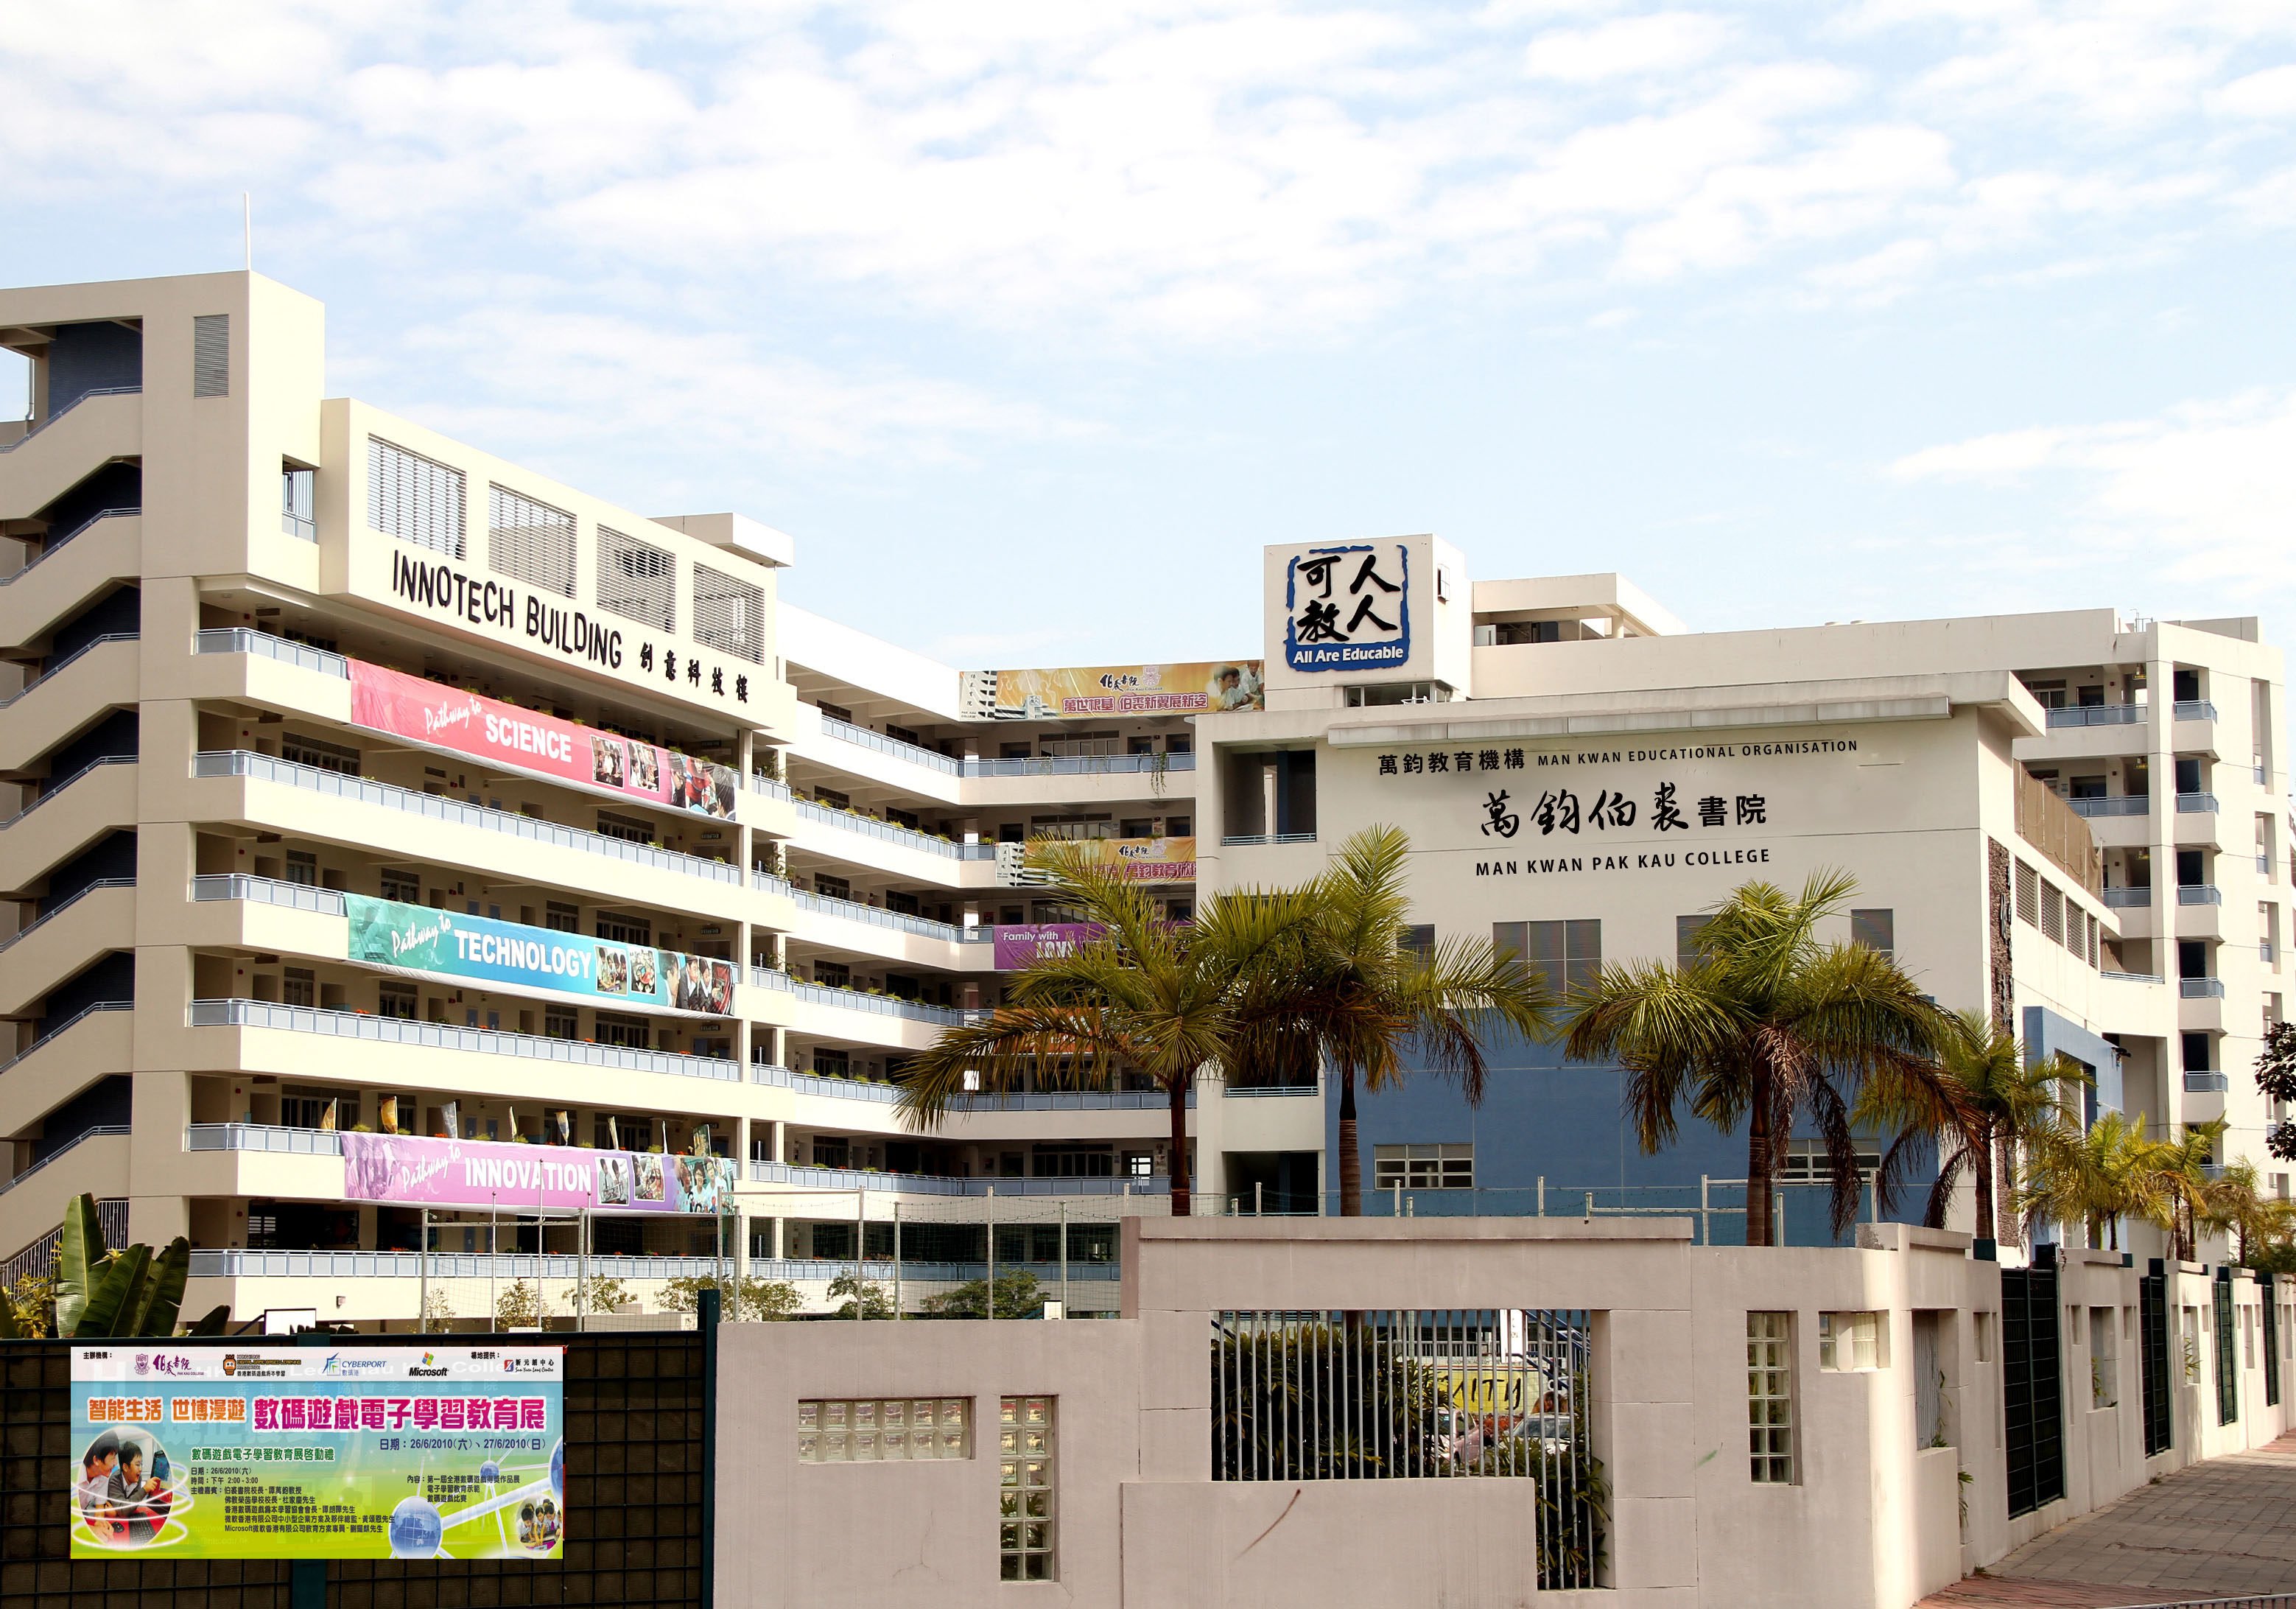 Man Kwan Pak Kau College in Tin Shui Wai, which is at the centre of a row over sensitivity to Islamic traditions. Photo: Handout 